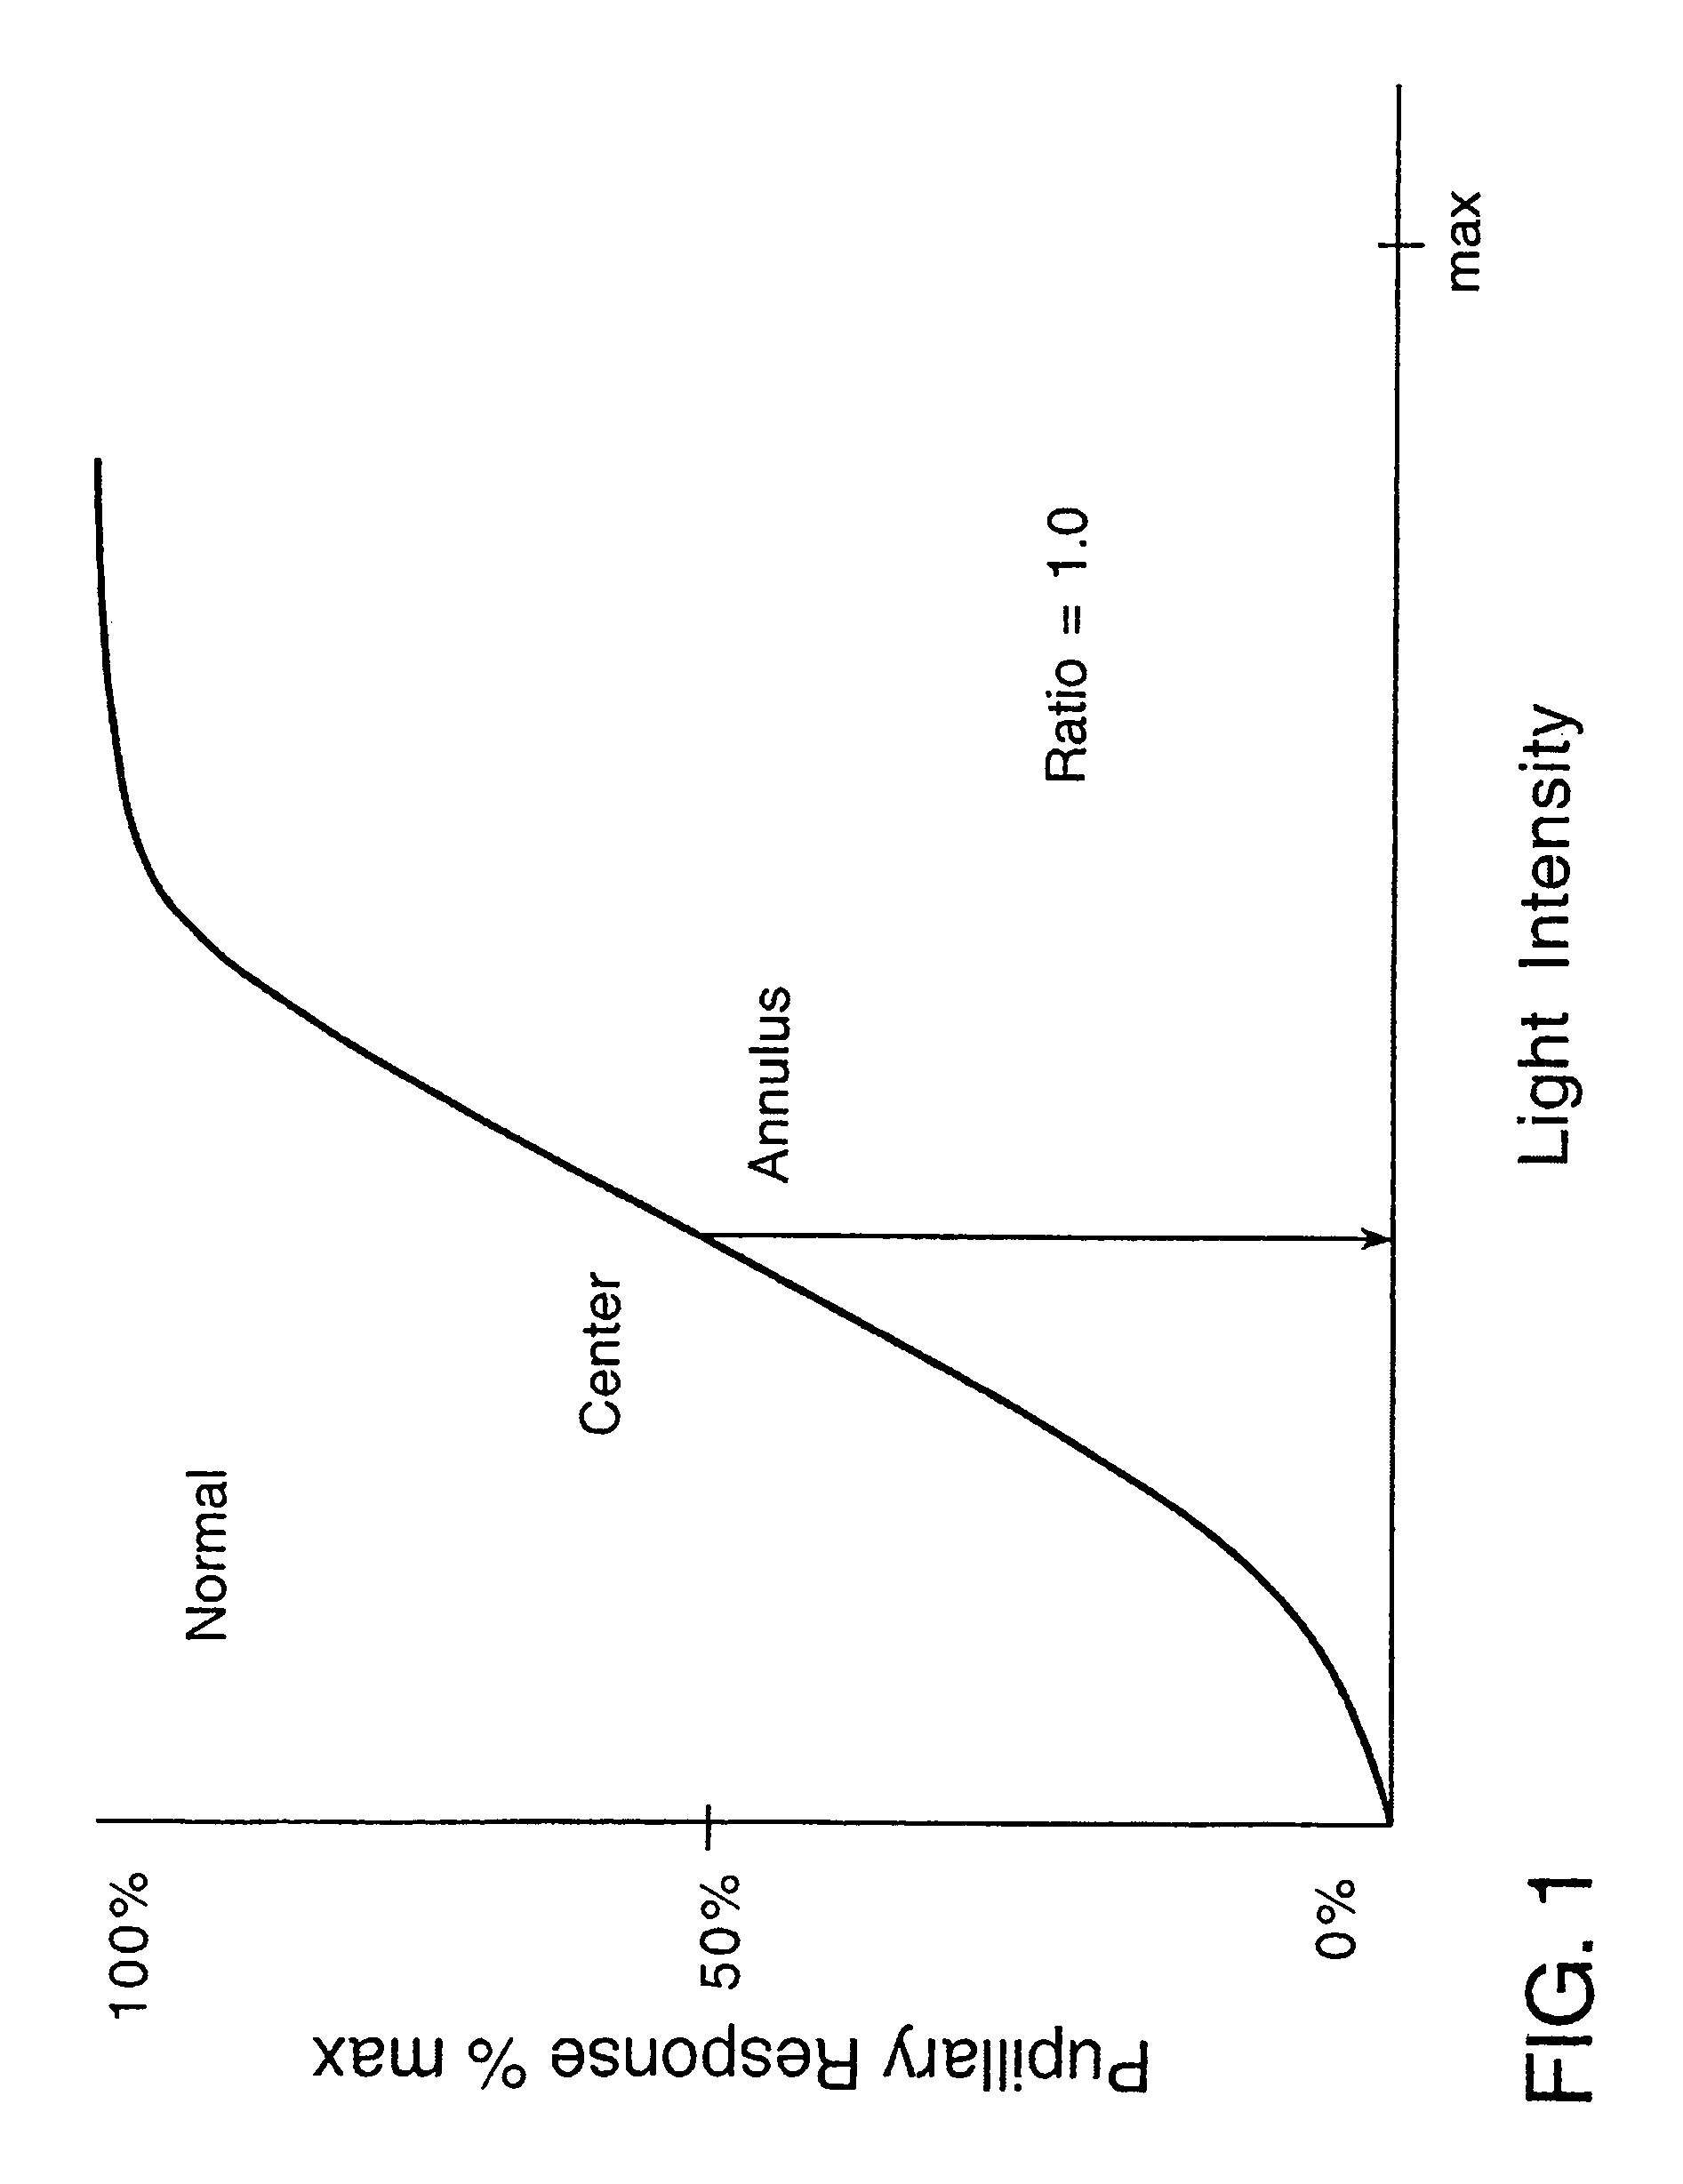 Method and apparatus for screening for retinopathy